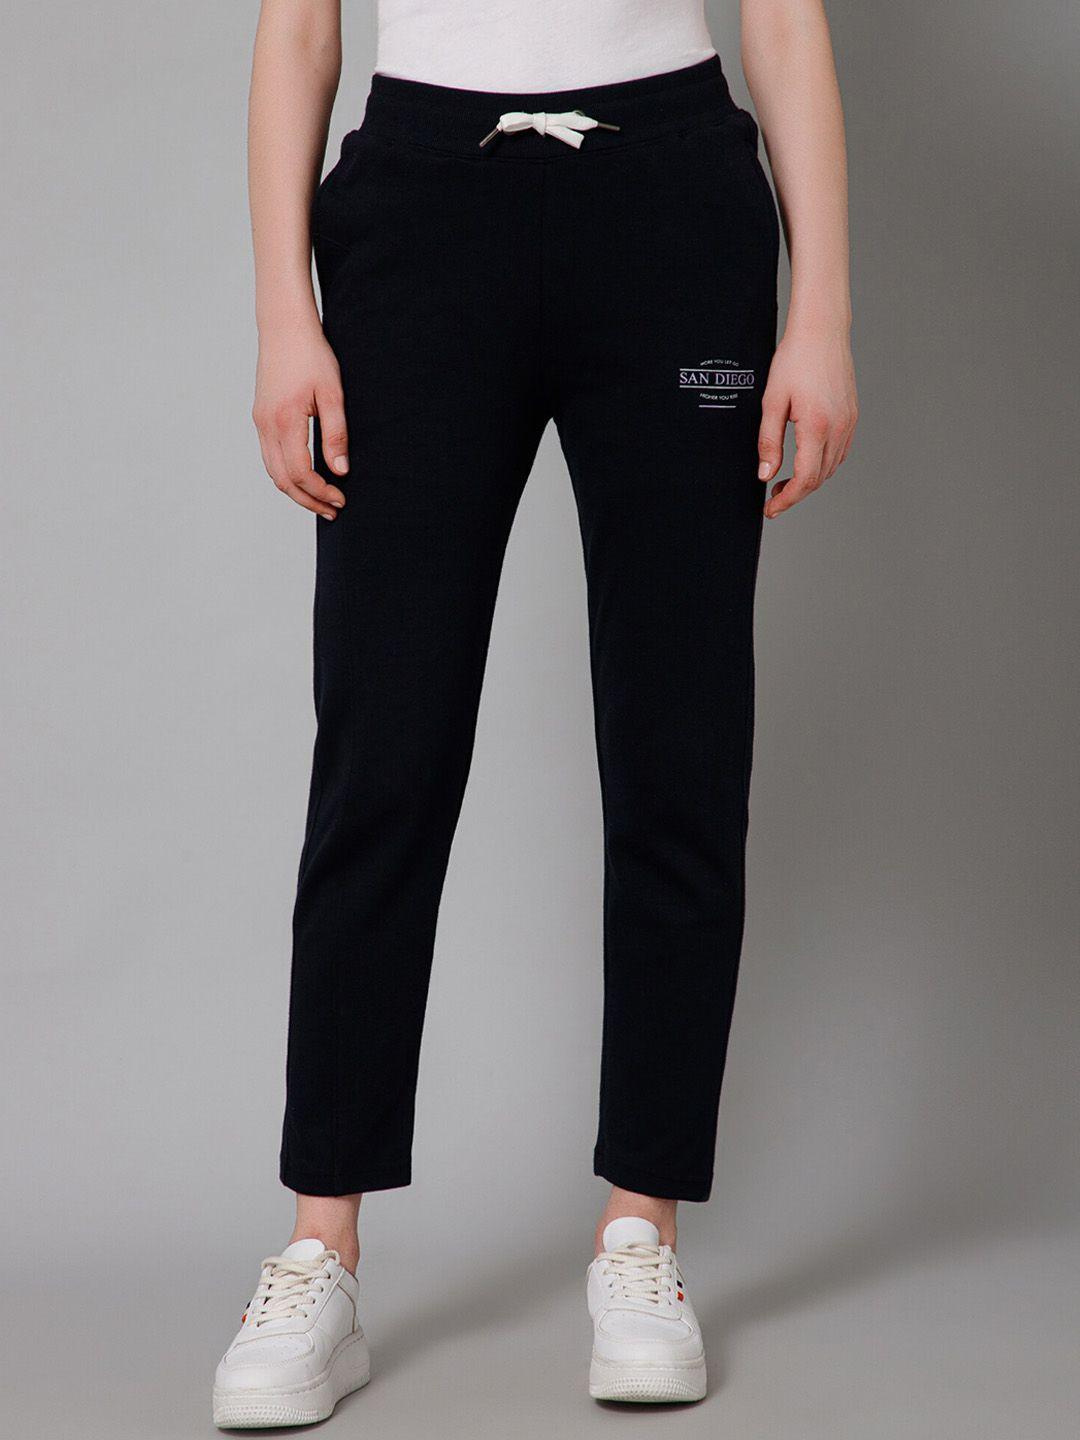 cantabil-women-mid-rise-ankle-length-track-pants